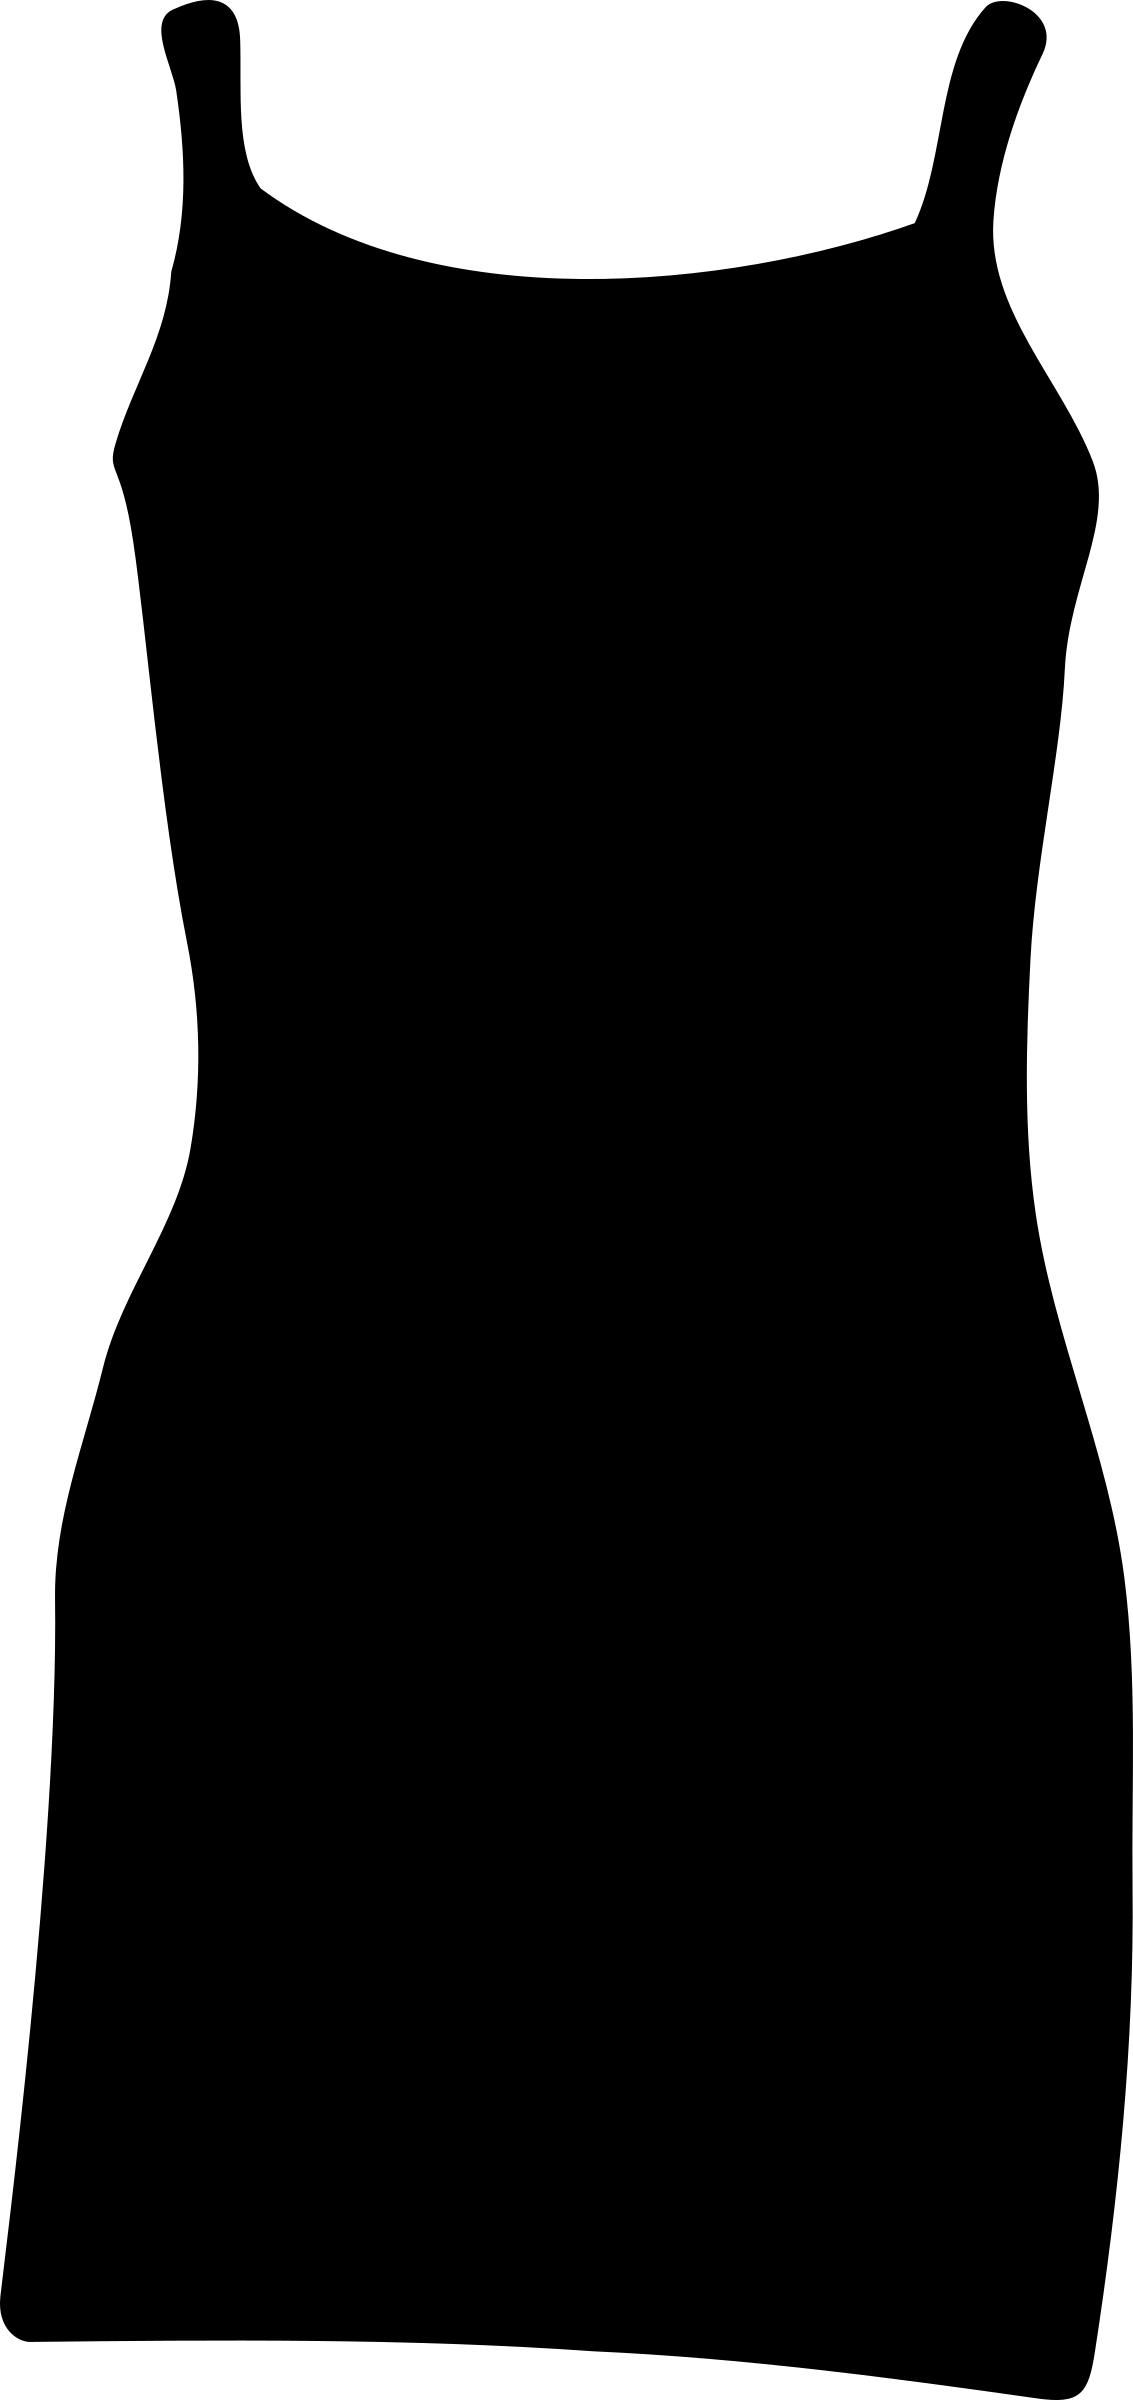 Dress silhouette png